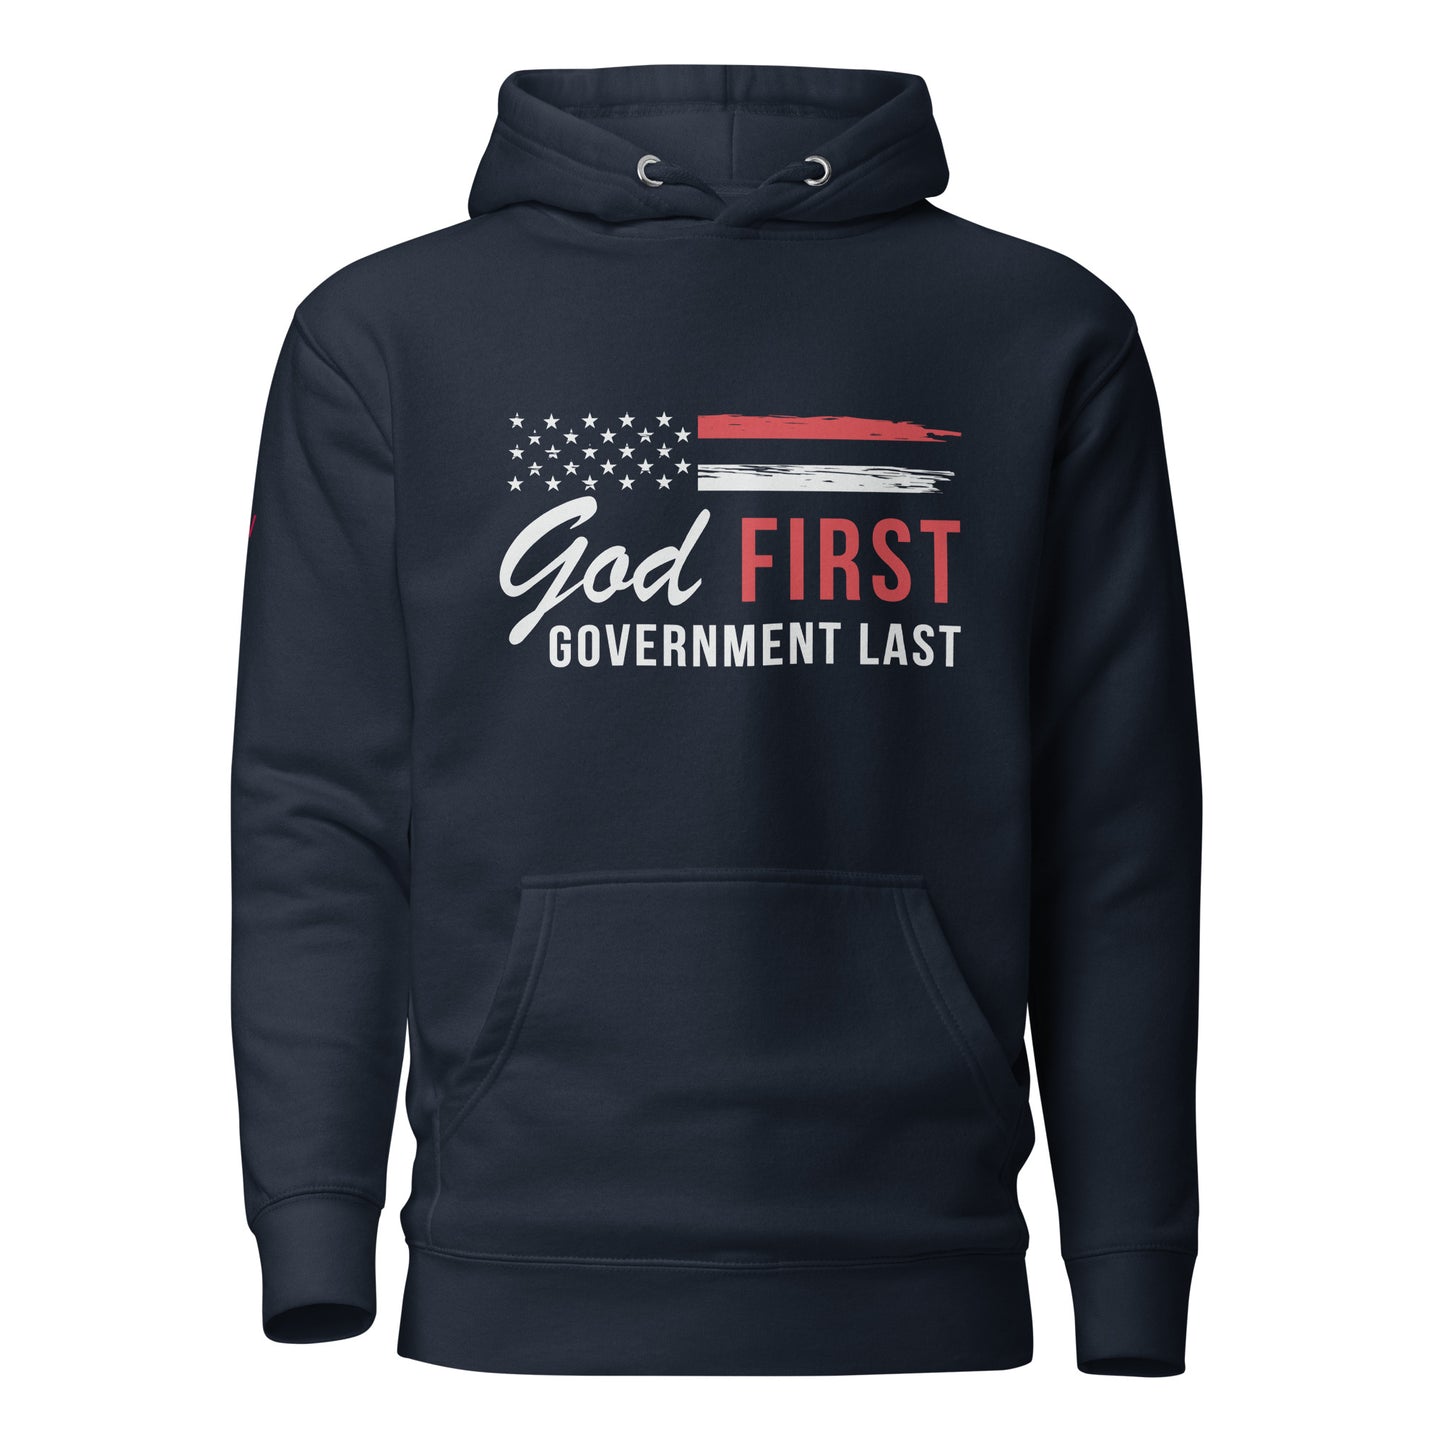 God First Government Last Hoodie